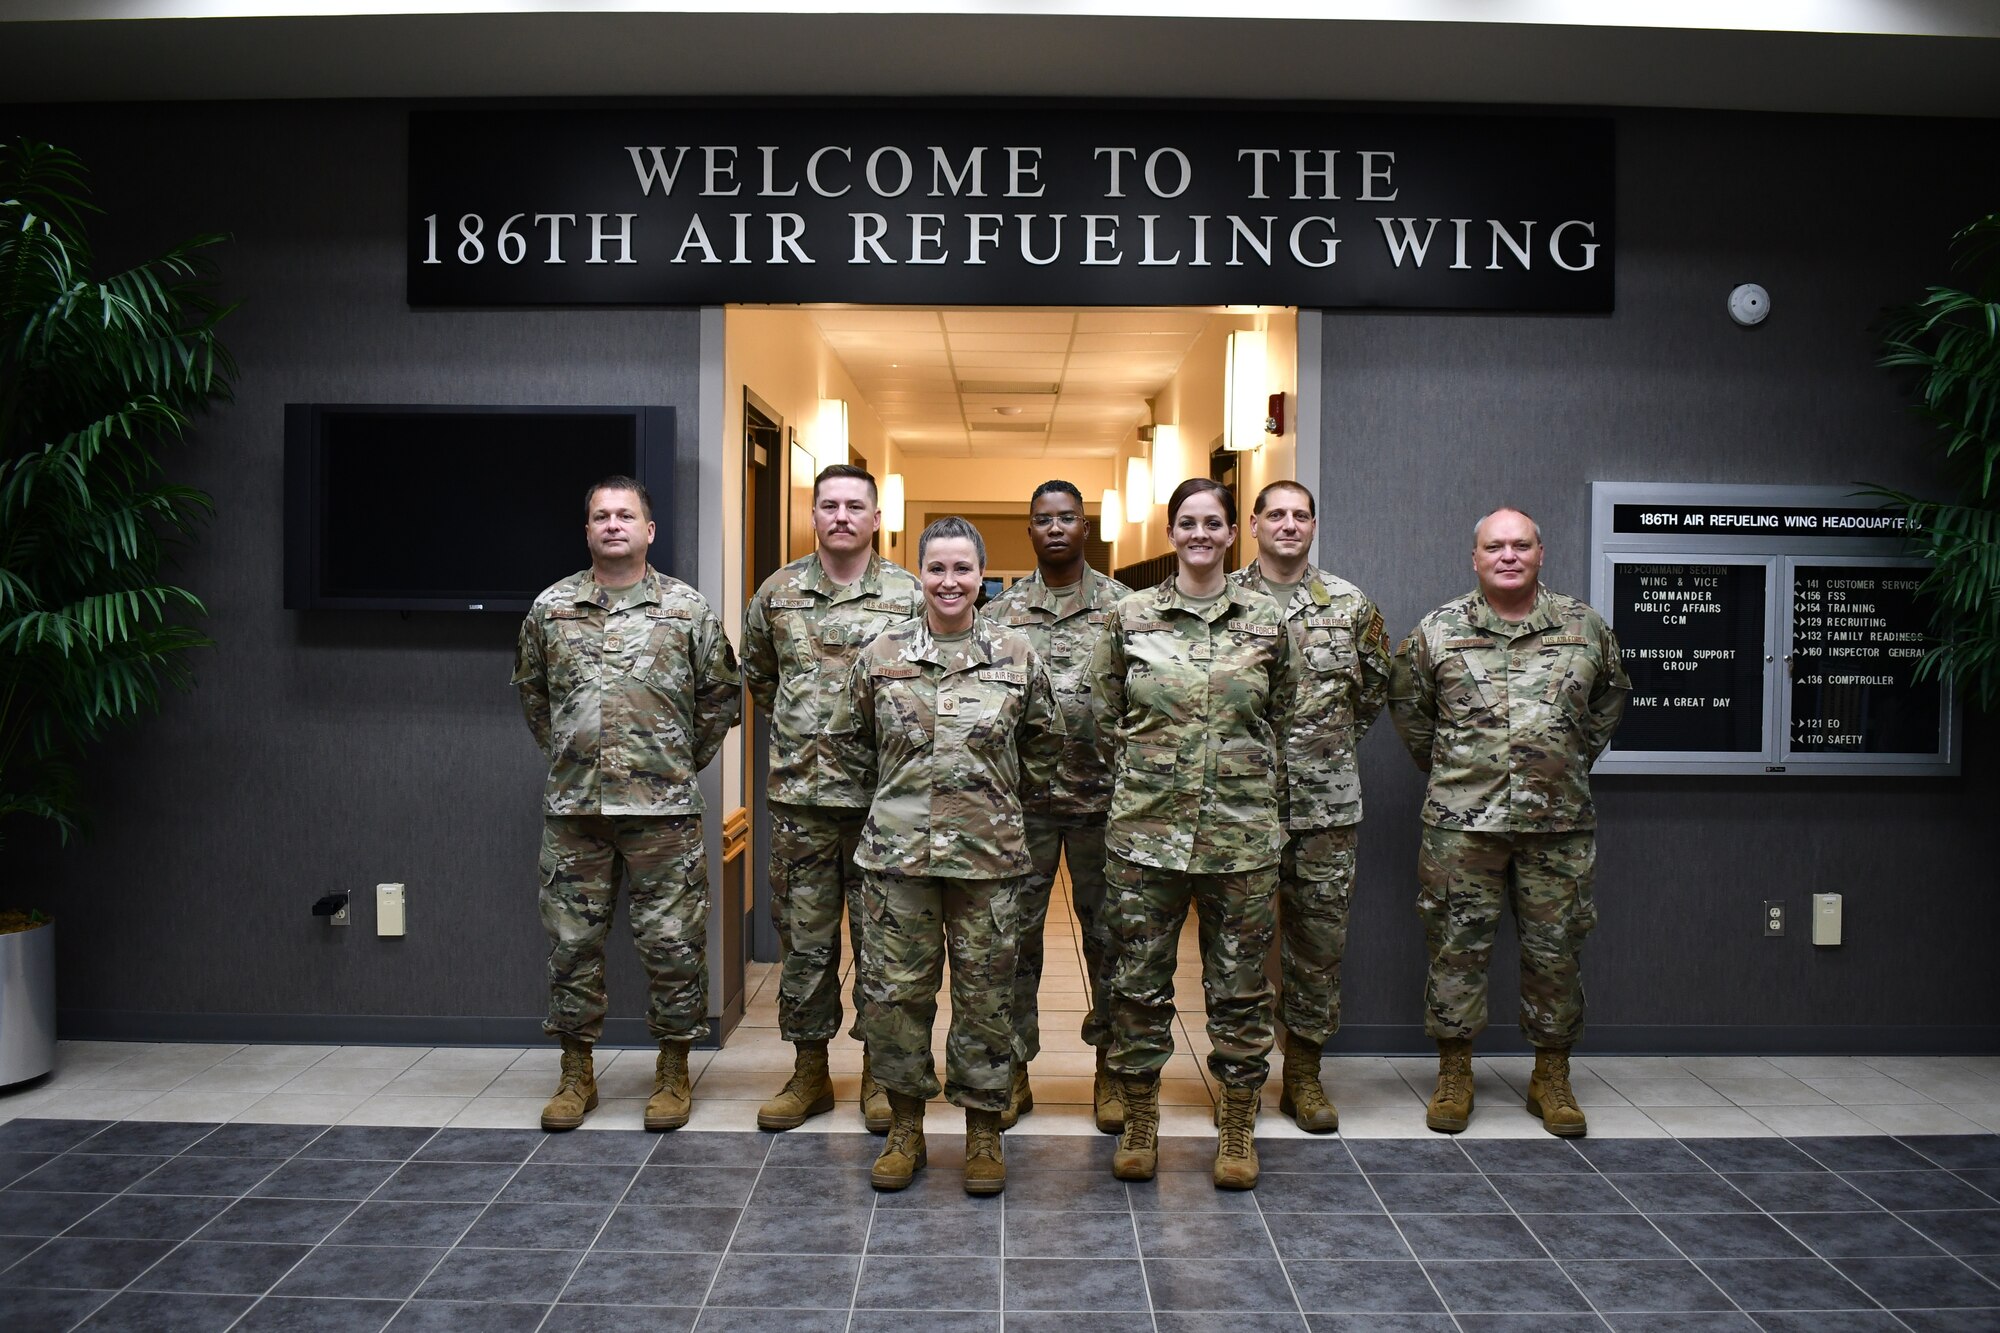 U.S. Air Force First Sergeants with the 186th Air Refueling Wing, Mississippi, pose for a group photo, at Key Field Air National Guard Base, Meridian, Miss., October 3, 2021.They met to plan a morale boosting event for young airman following the death of a young wing member. (U.S. Air National Guard photo by Staff Sgt. Ryaunte Perkins)